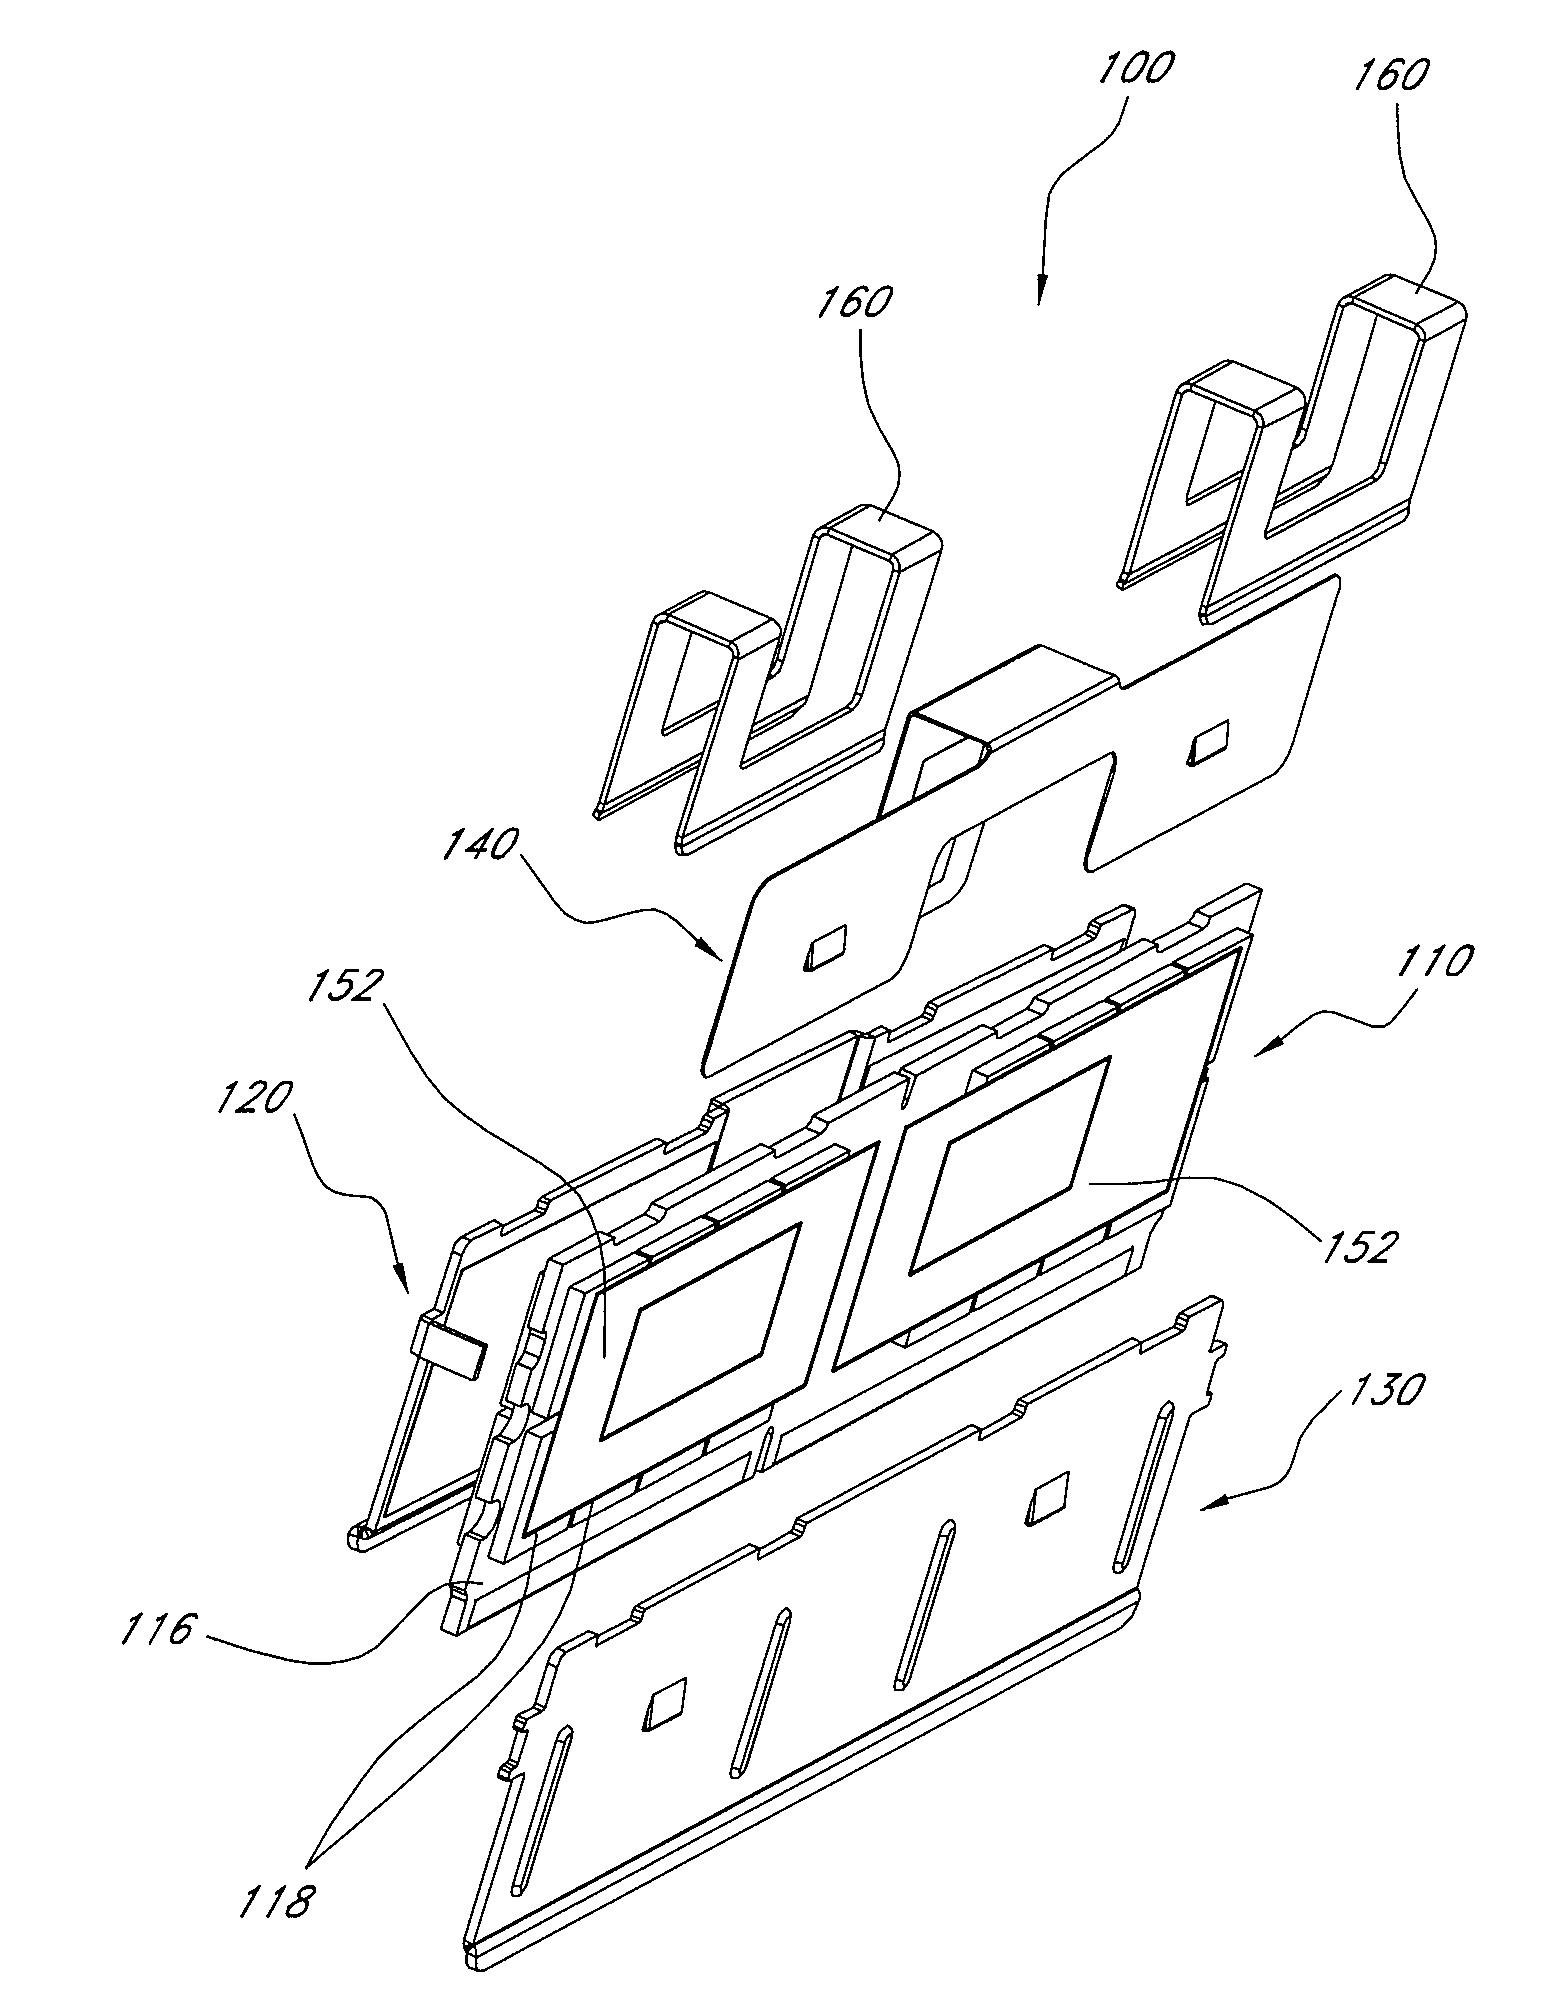 Heat dissipation for electronic modules